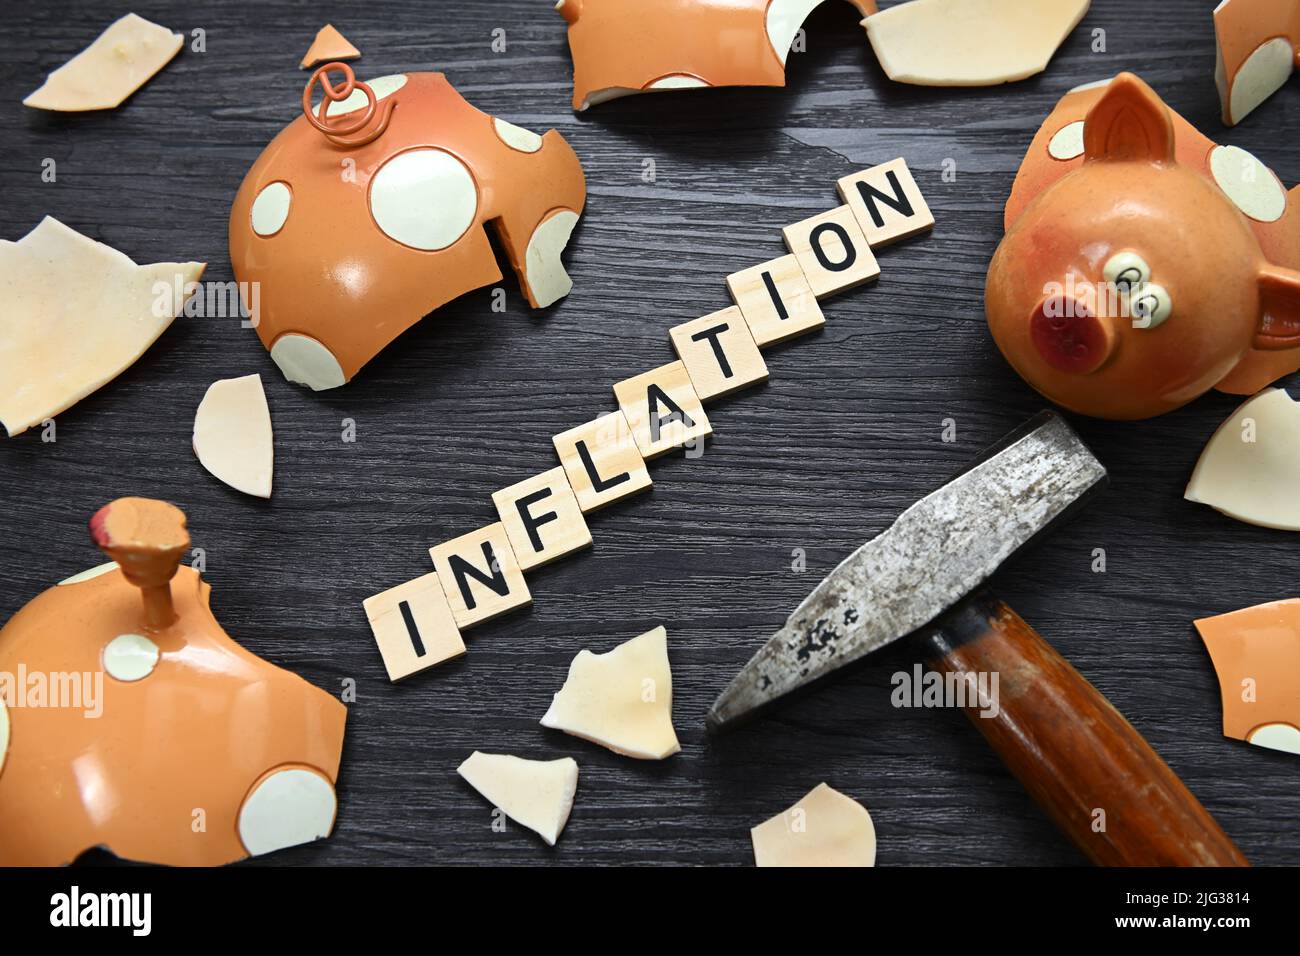 Broken Piggy Bank And Letter Tiles, Inflation Stock Photo